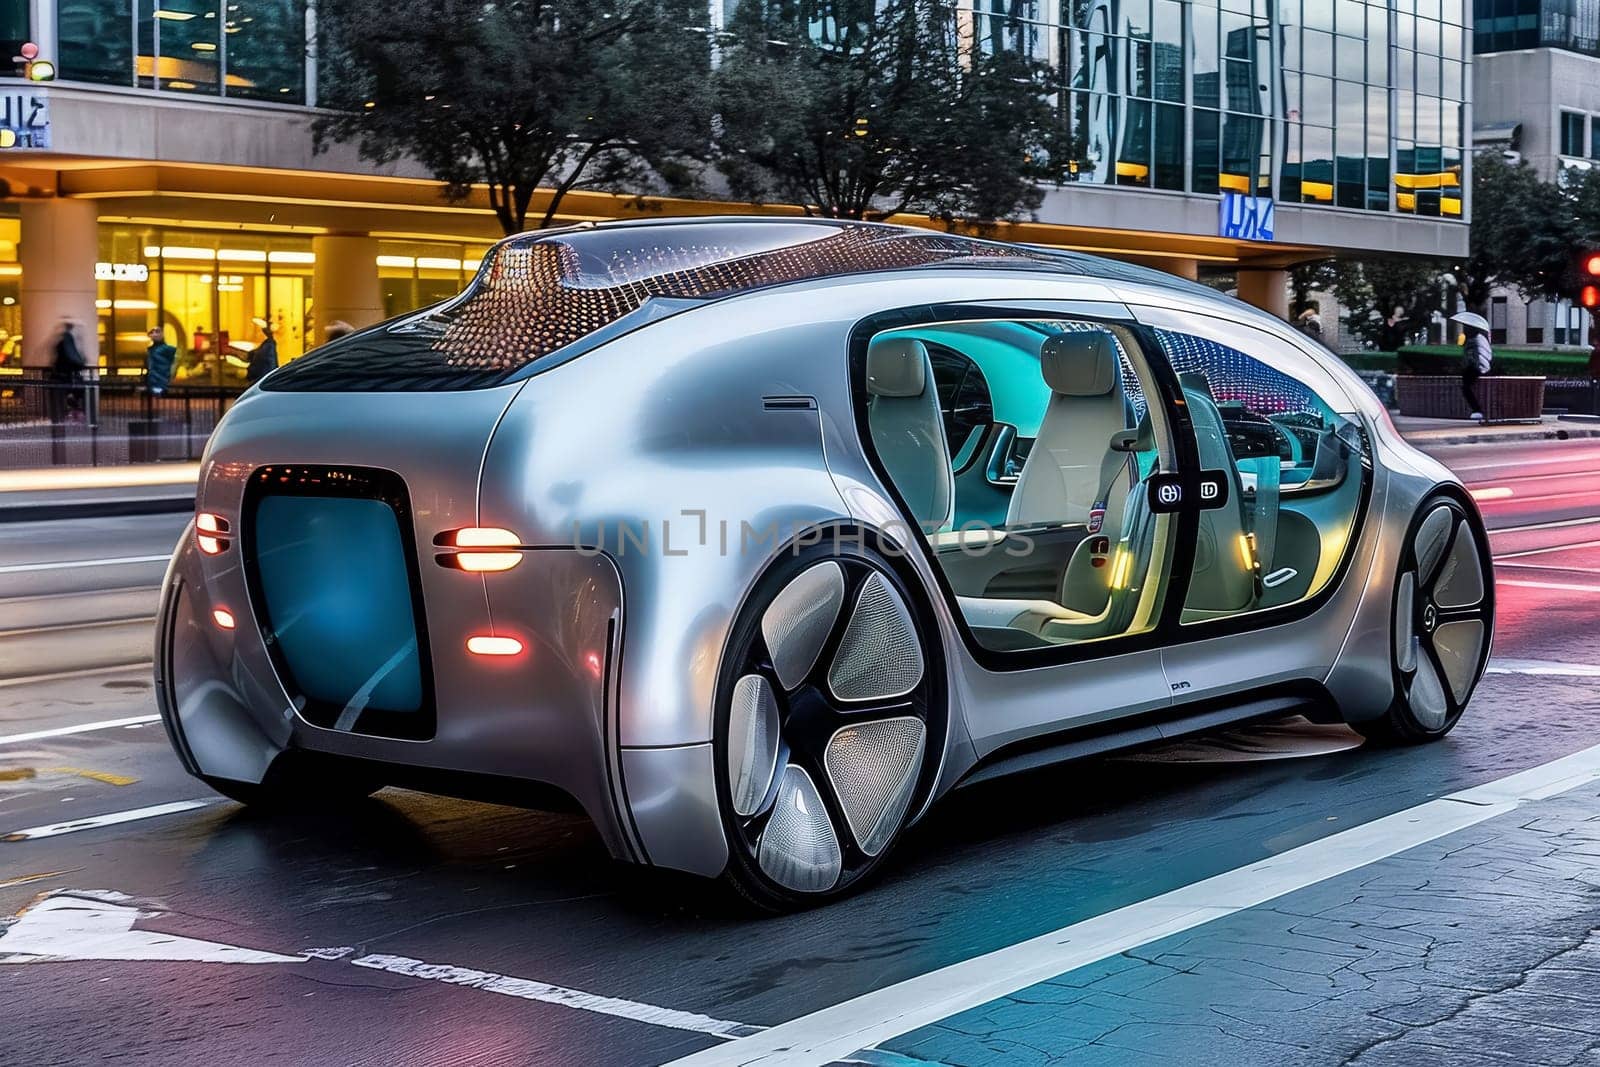 A futuristic autonomous car navigates through the bustling city streets at twilight, showcasing cutting-edge technology in urban transportation. The car's sleek design and illuminated panels highlight the blend of innovation and style